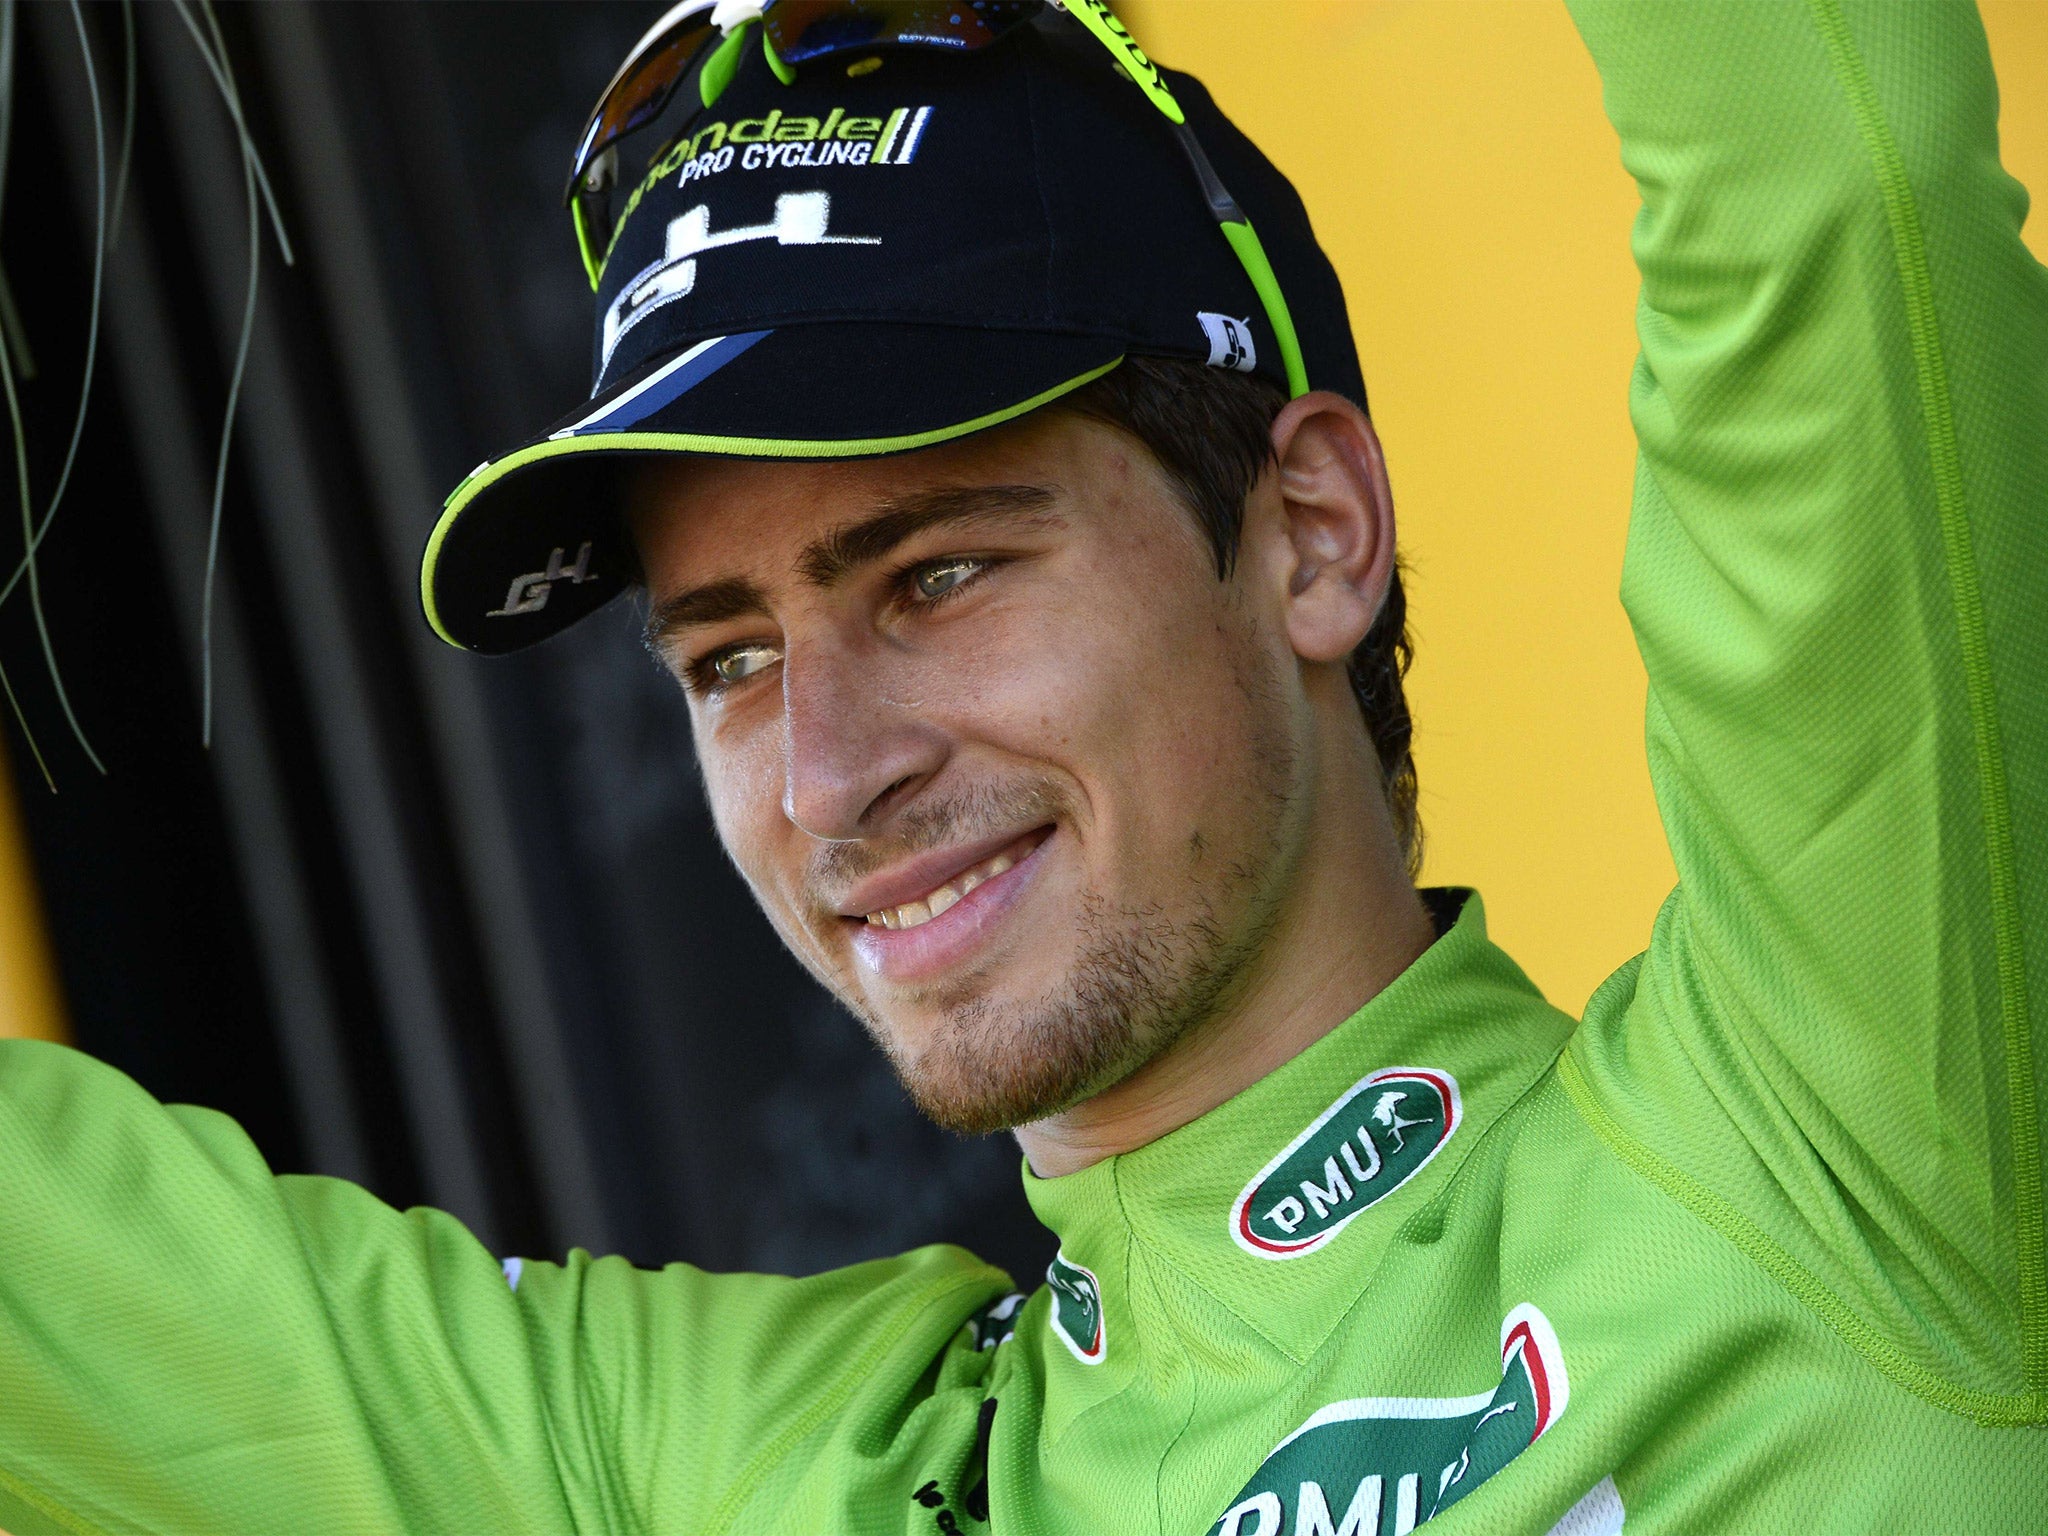 Peter Sagan will need strong support from his Cannondale team if he is to lead a breakaway